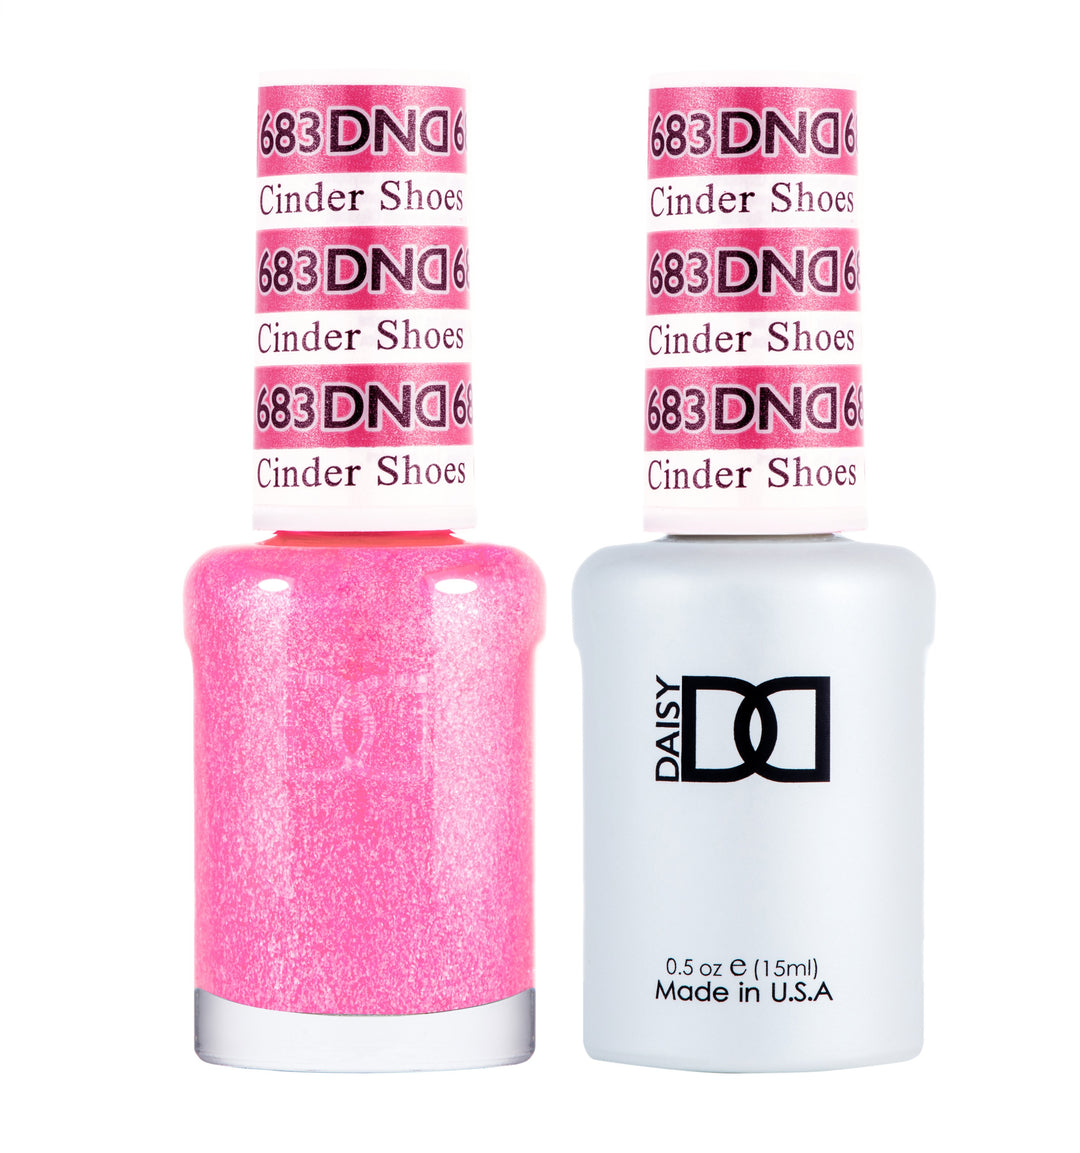 DND DUO Nail Lacquer and UV|LED Gel Polish Cinder Shoes 683 (2 x 15ml)